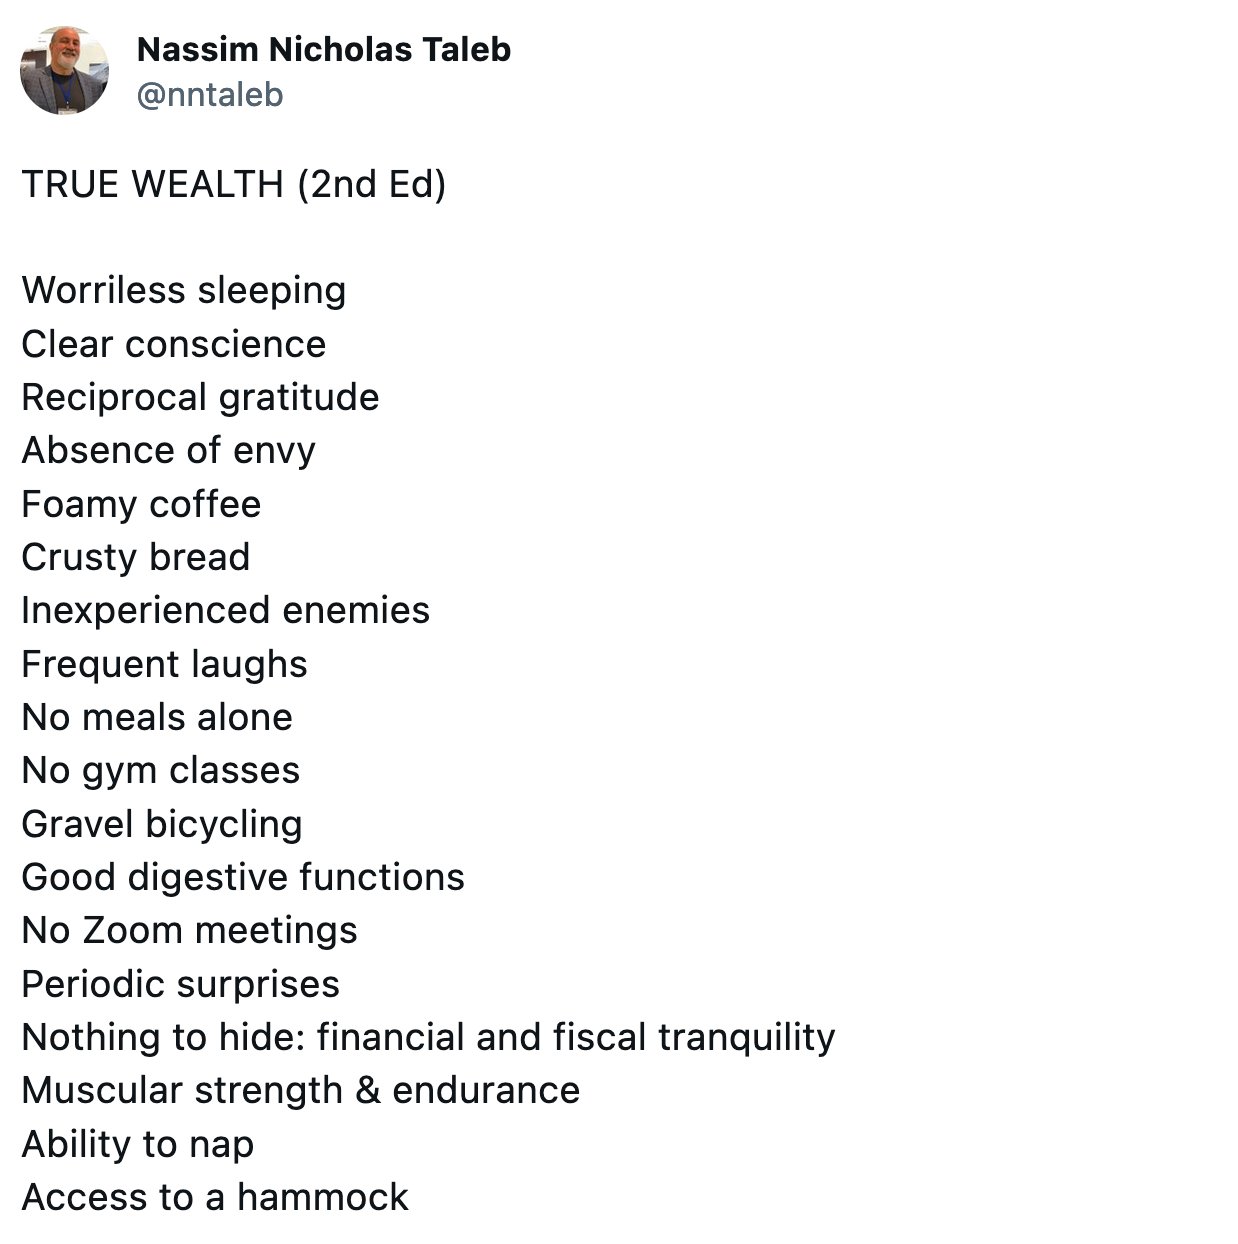 TRUE WEALTH (2nd Ed) Worriless sleeping Clear conscience Reciprocal gratitude Absence of envy Foamy coffee Crusty bread Inexperienced enemies Frequent laughs No meals alone No gym classes Gravel bicycling Good digestive functions No Zoom meetings Periodic surprises Nothing to hide: financial and fiscal tranquility Muscular strength & endurance Ability to nap Access to a hammock